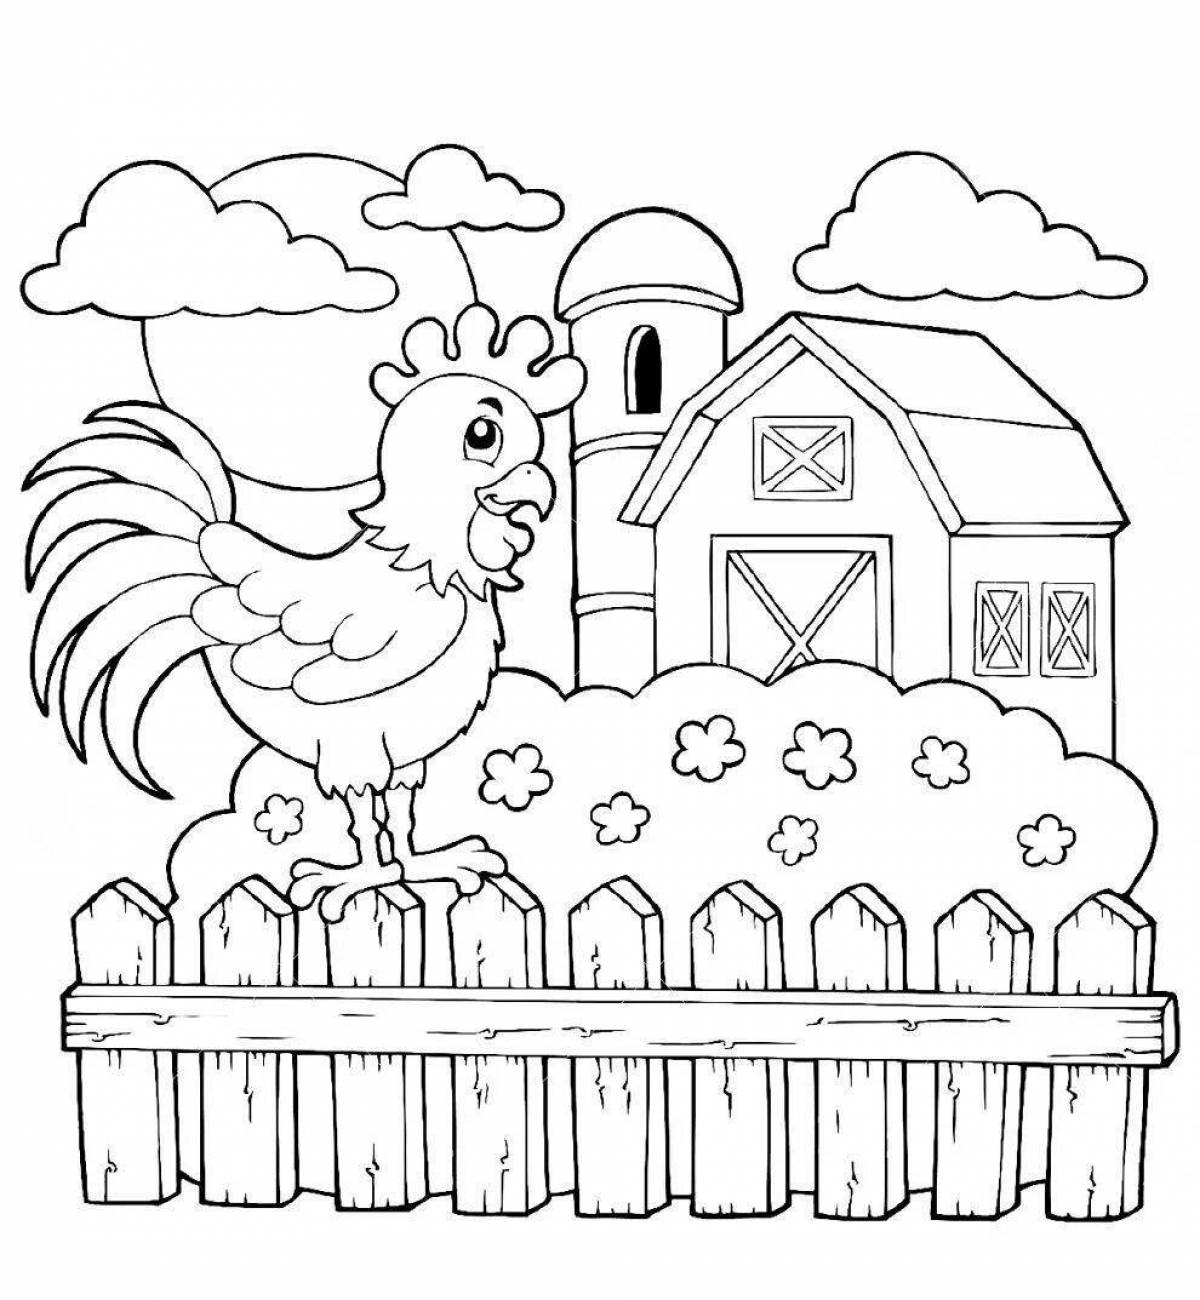 Bright bird yard coloring for kids